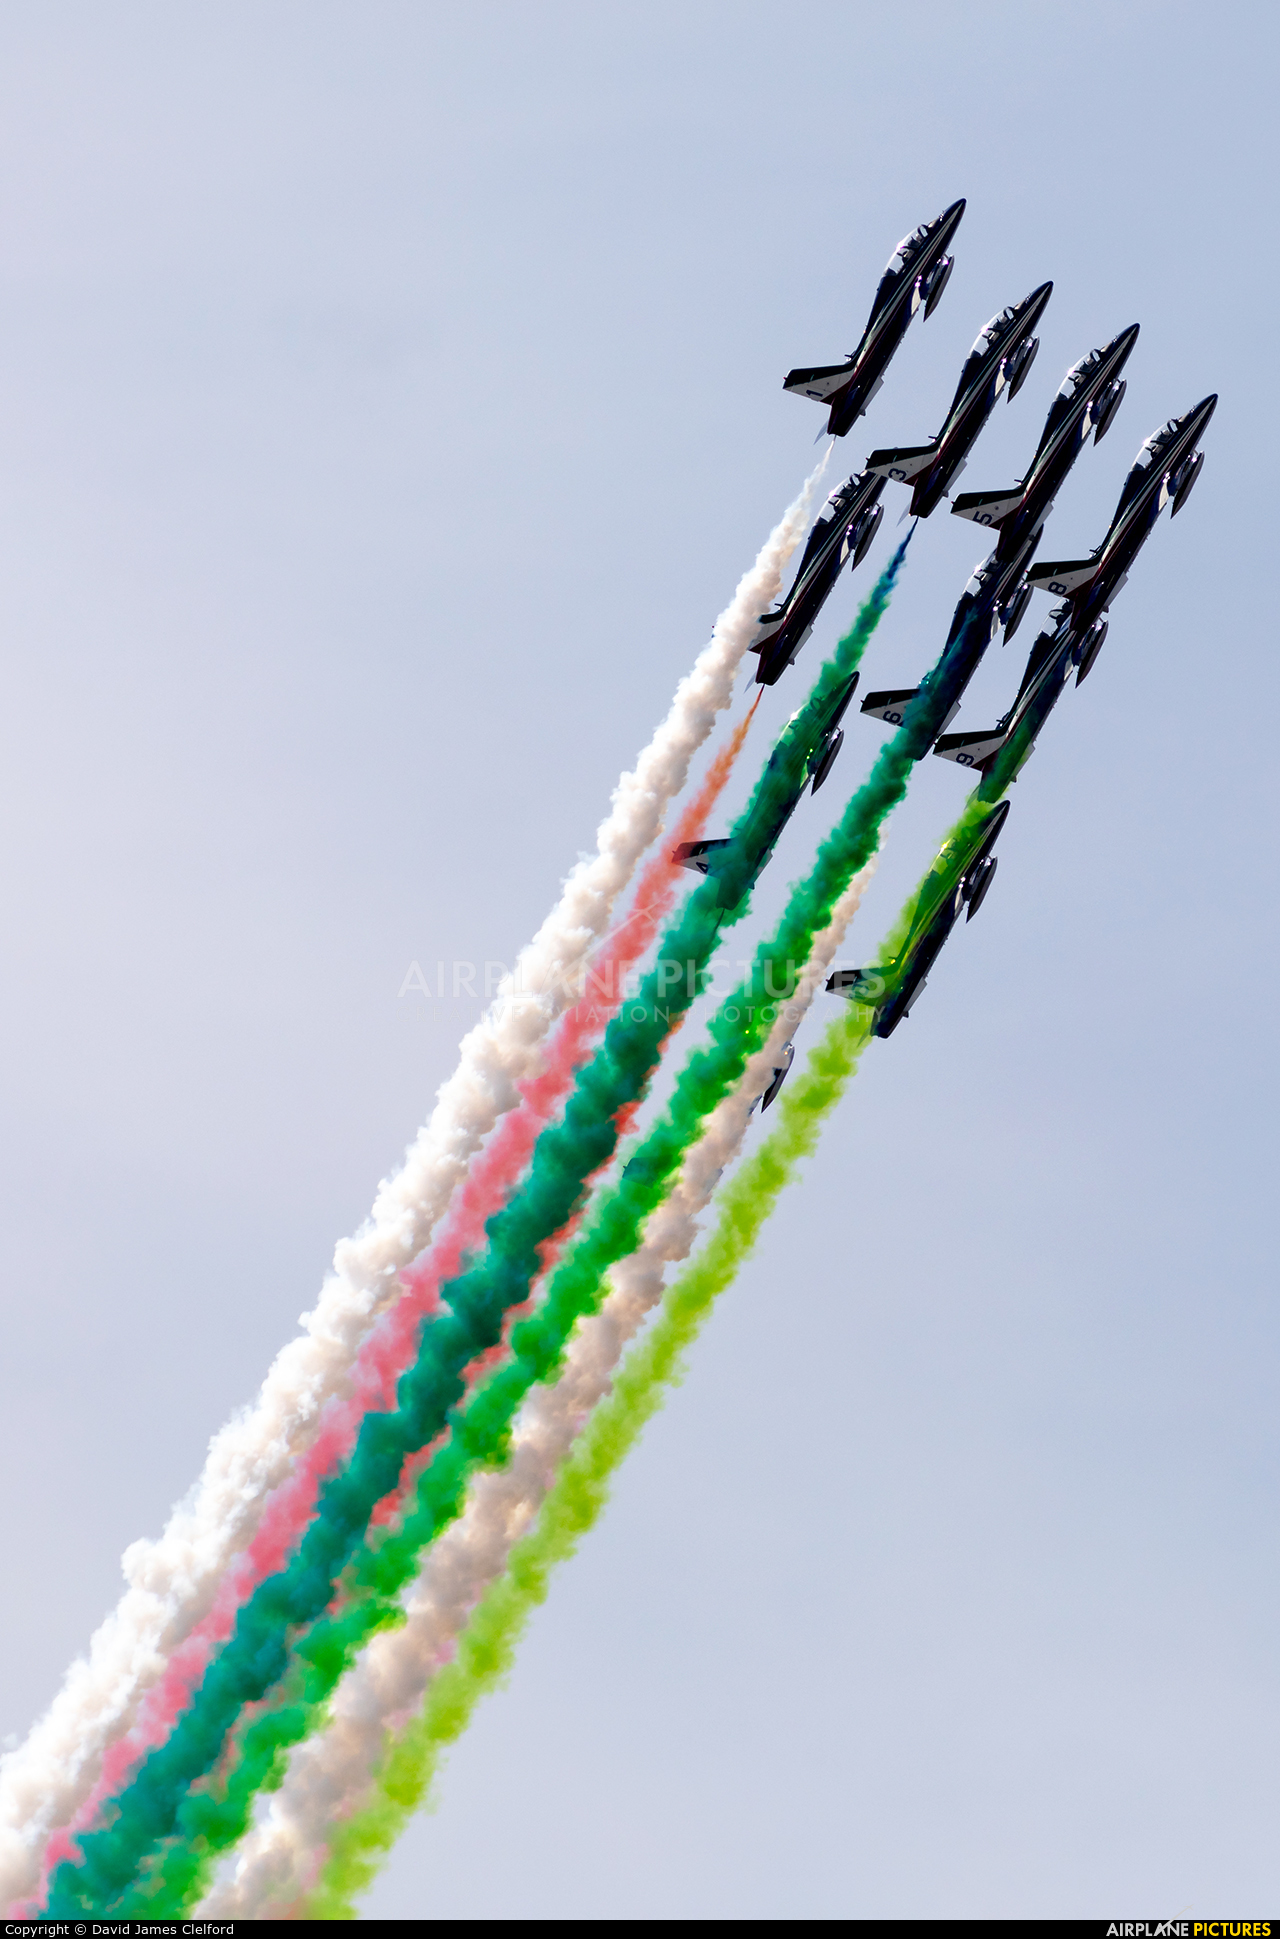 Italy - Air Force "Frecce Tricolori" - aircraft at Fairford